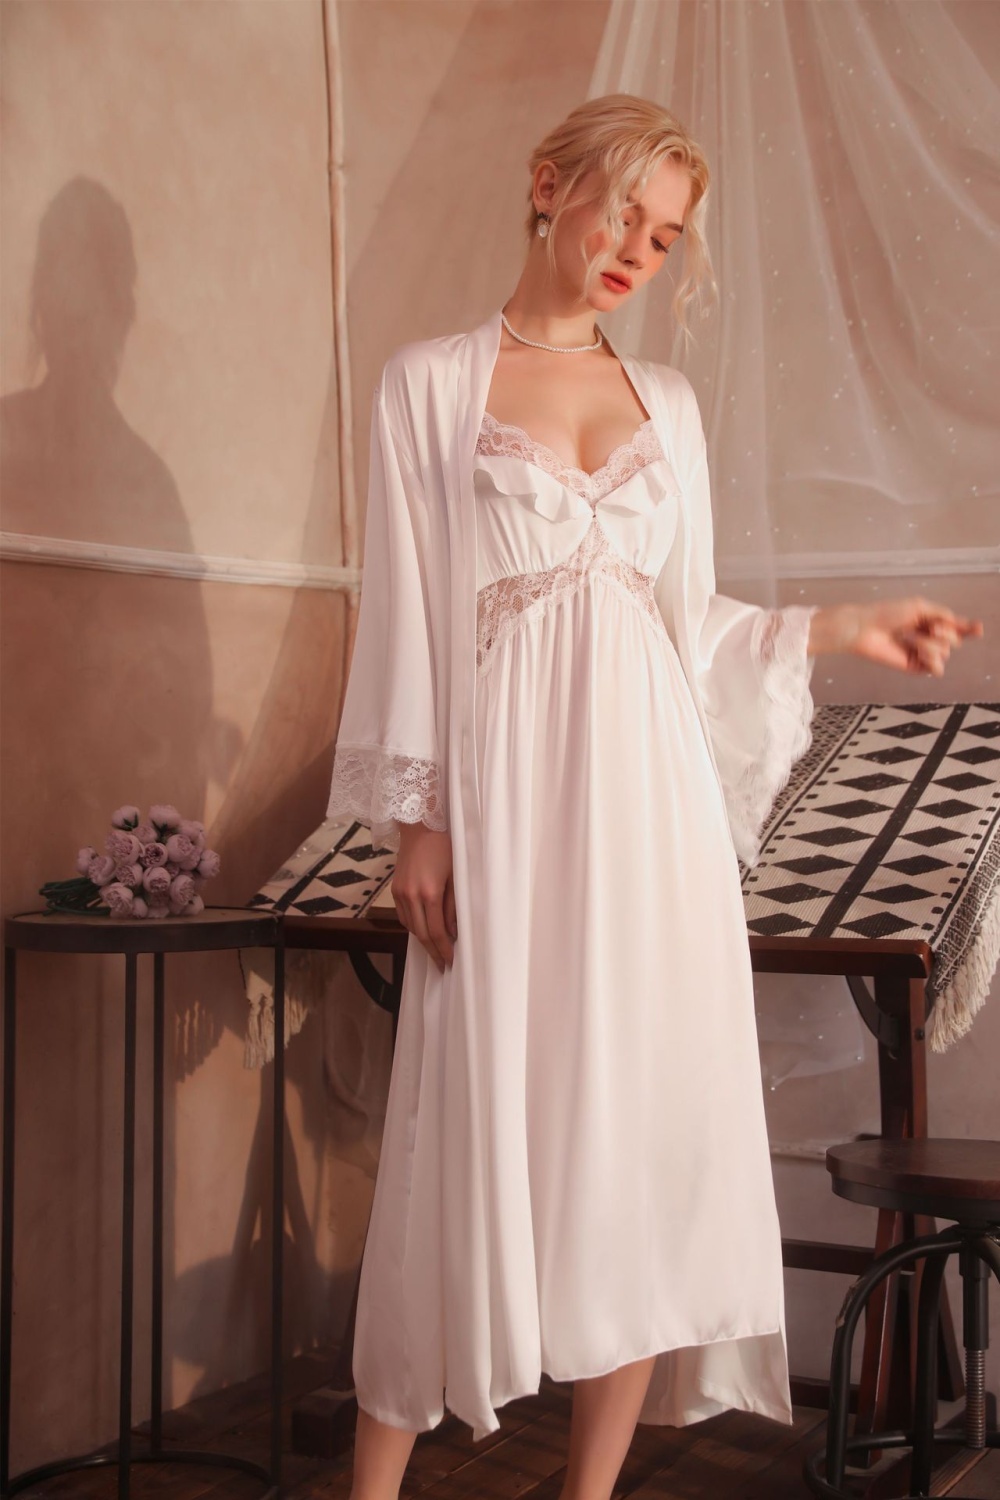 Sling pajamas long sleeve nightgown a set for women